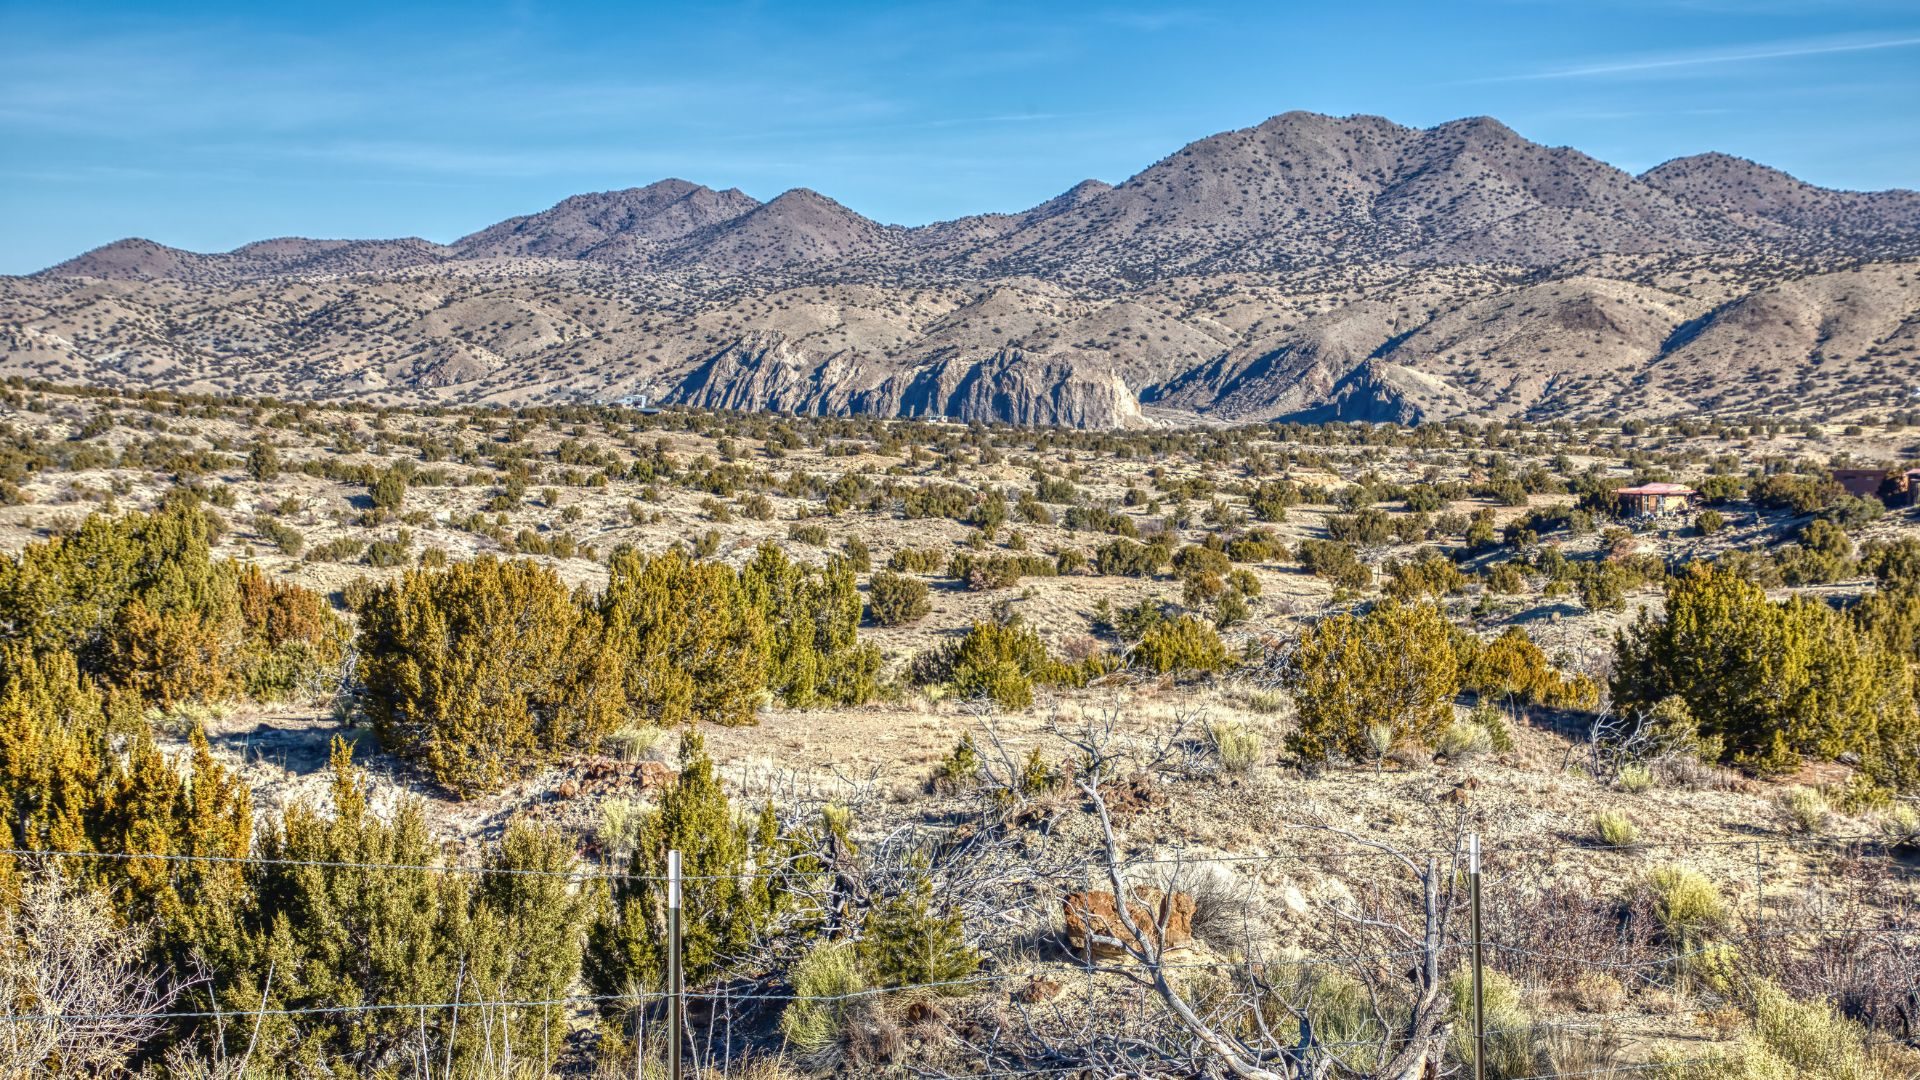 Turquoise Scenic Byway surrounded by desert landscape, mountains, and blue skies.